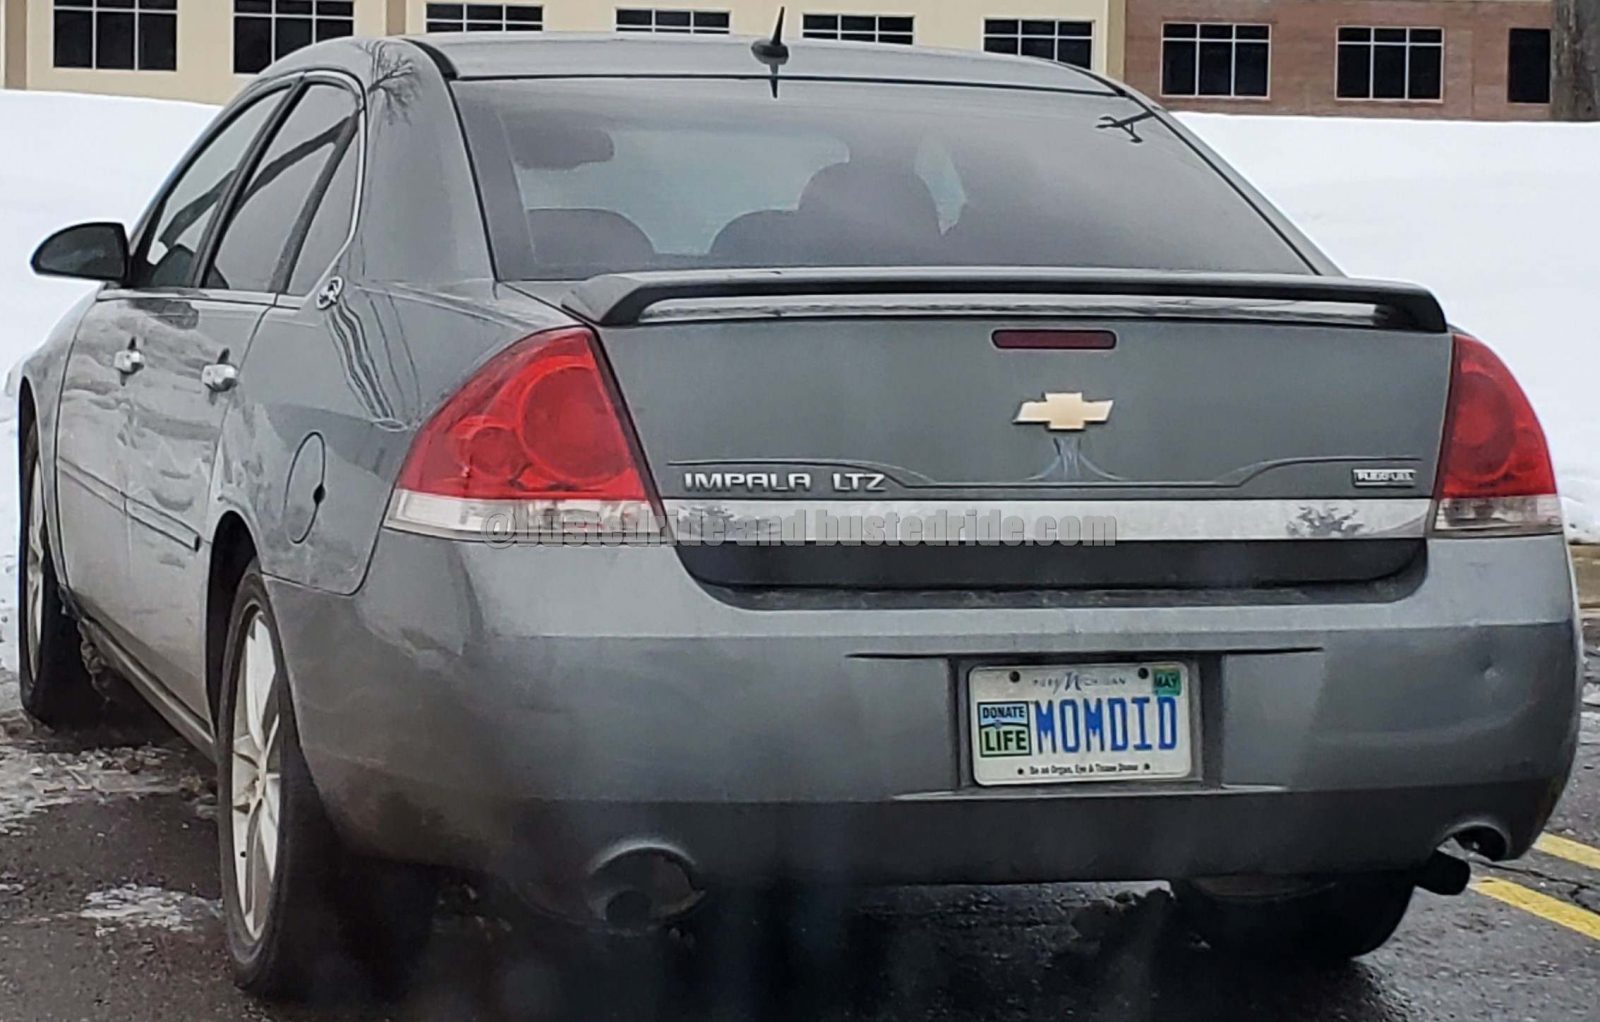 MOMDID - Vanity License Plate by Busted Ride